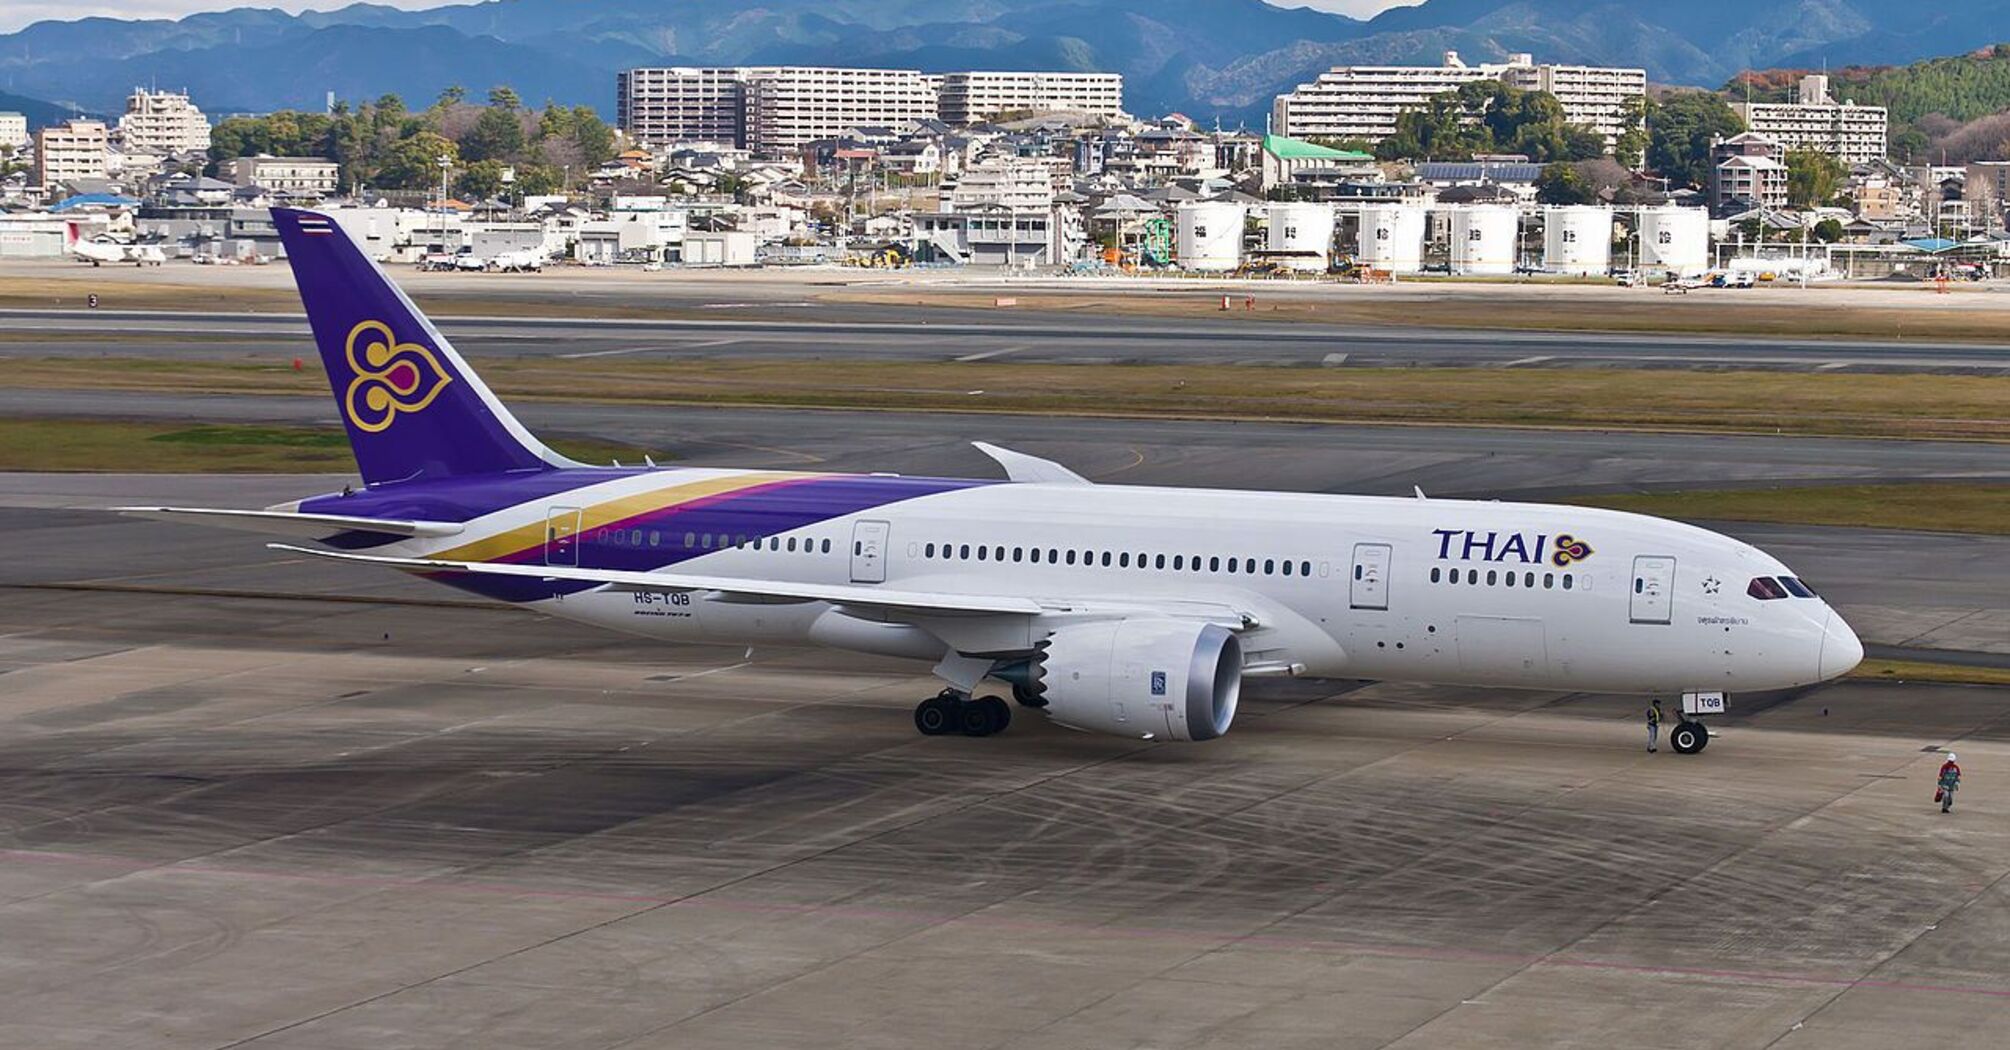 Boeing and Thai Airways have signed a historic deal at the Singapore Airshow